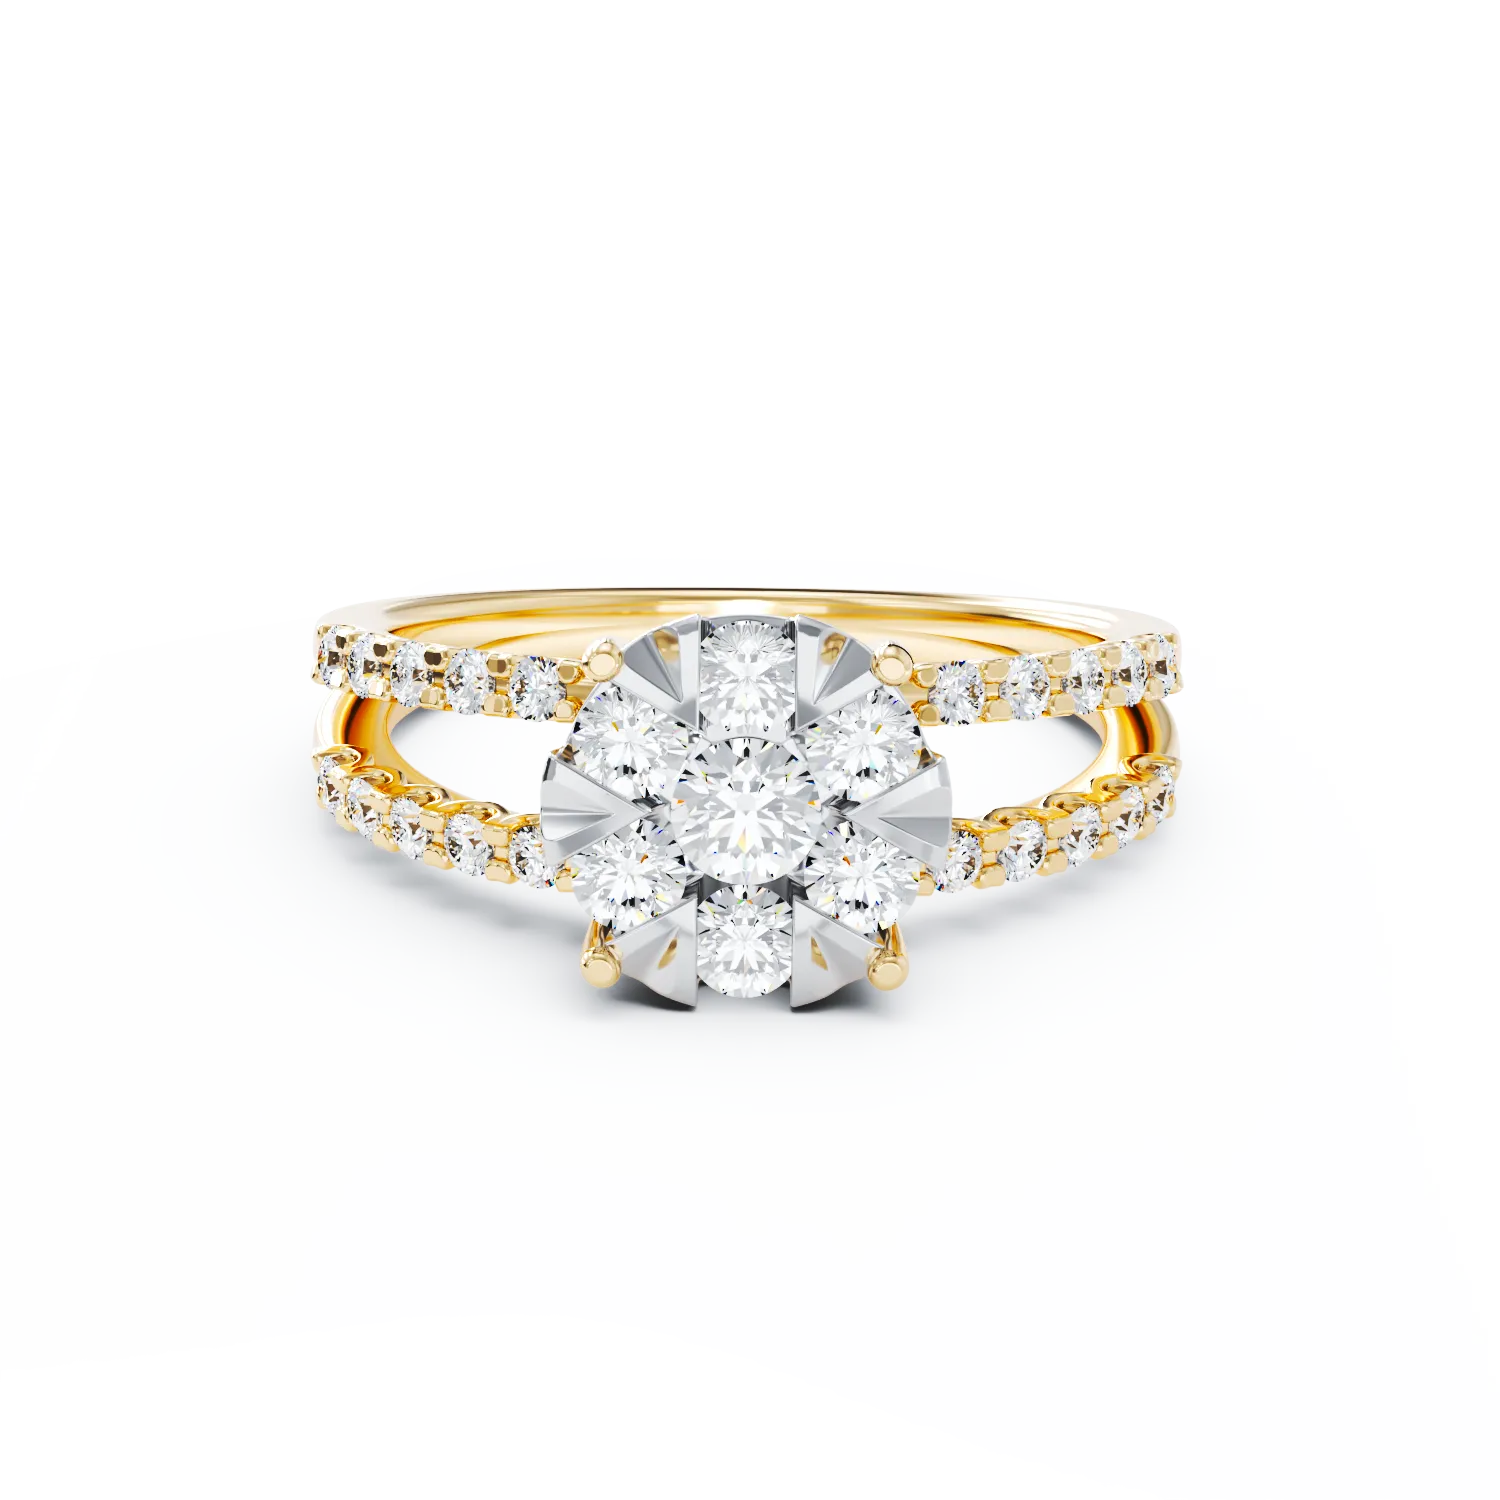 18K yellow gold engagement ring with 1ct diamonds